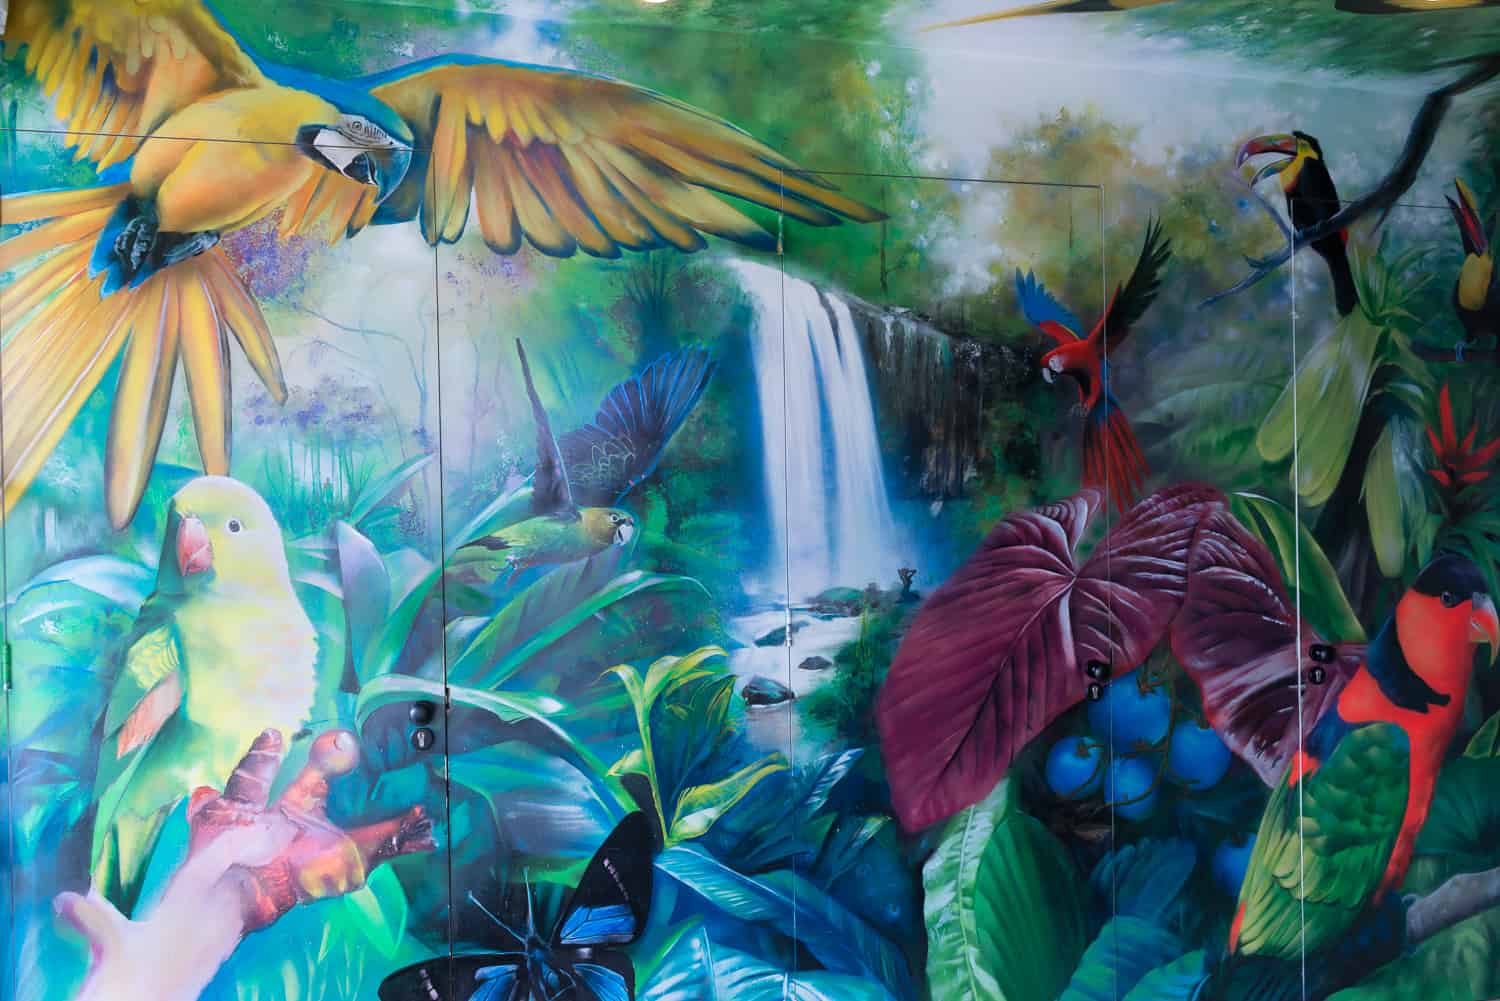 Image of a rain forest designed and painted by Telmo & Miel as found in the entrance of the Blue Tomato Coffeeshop in Hoorn